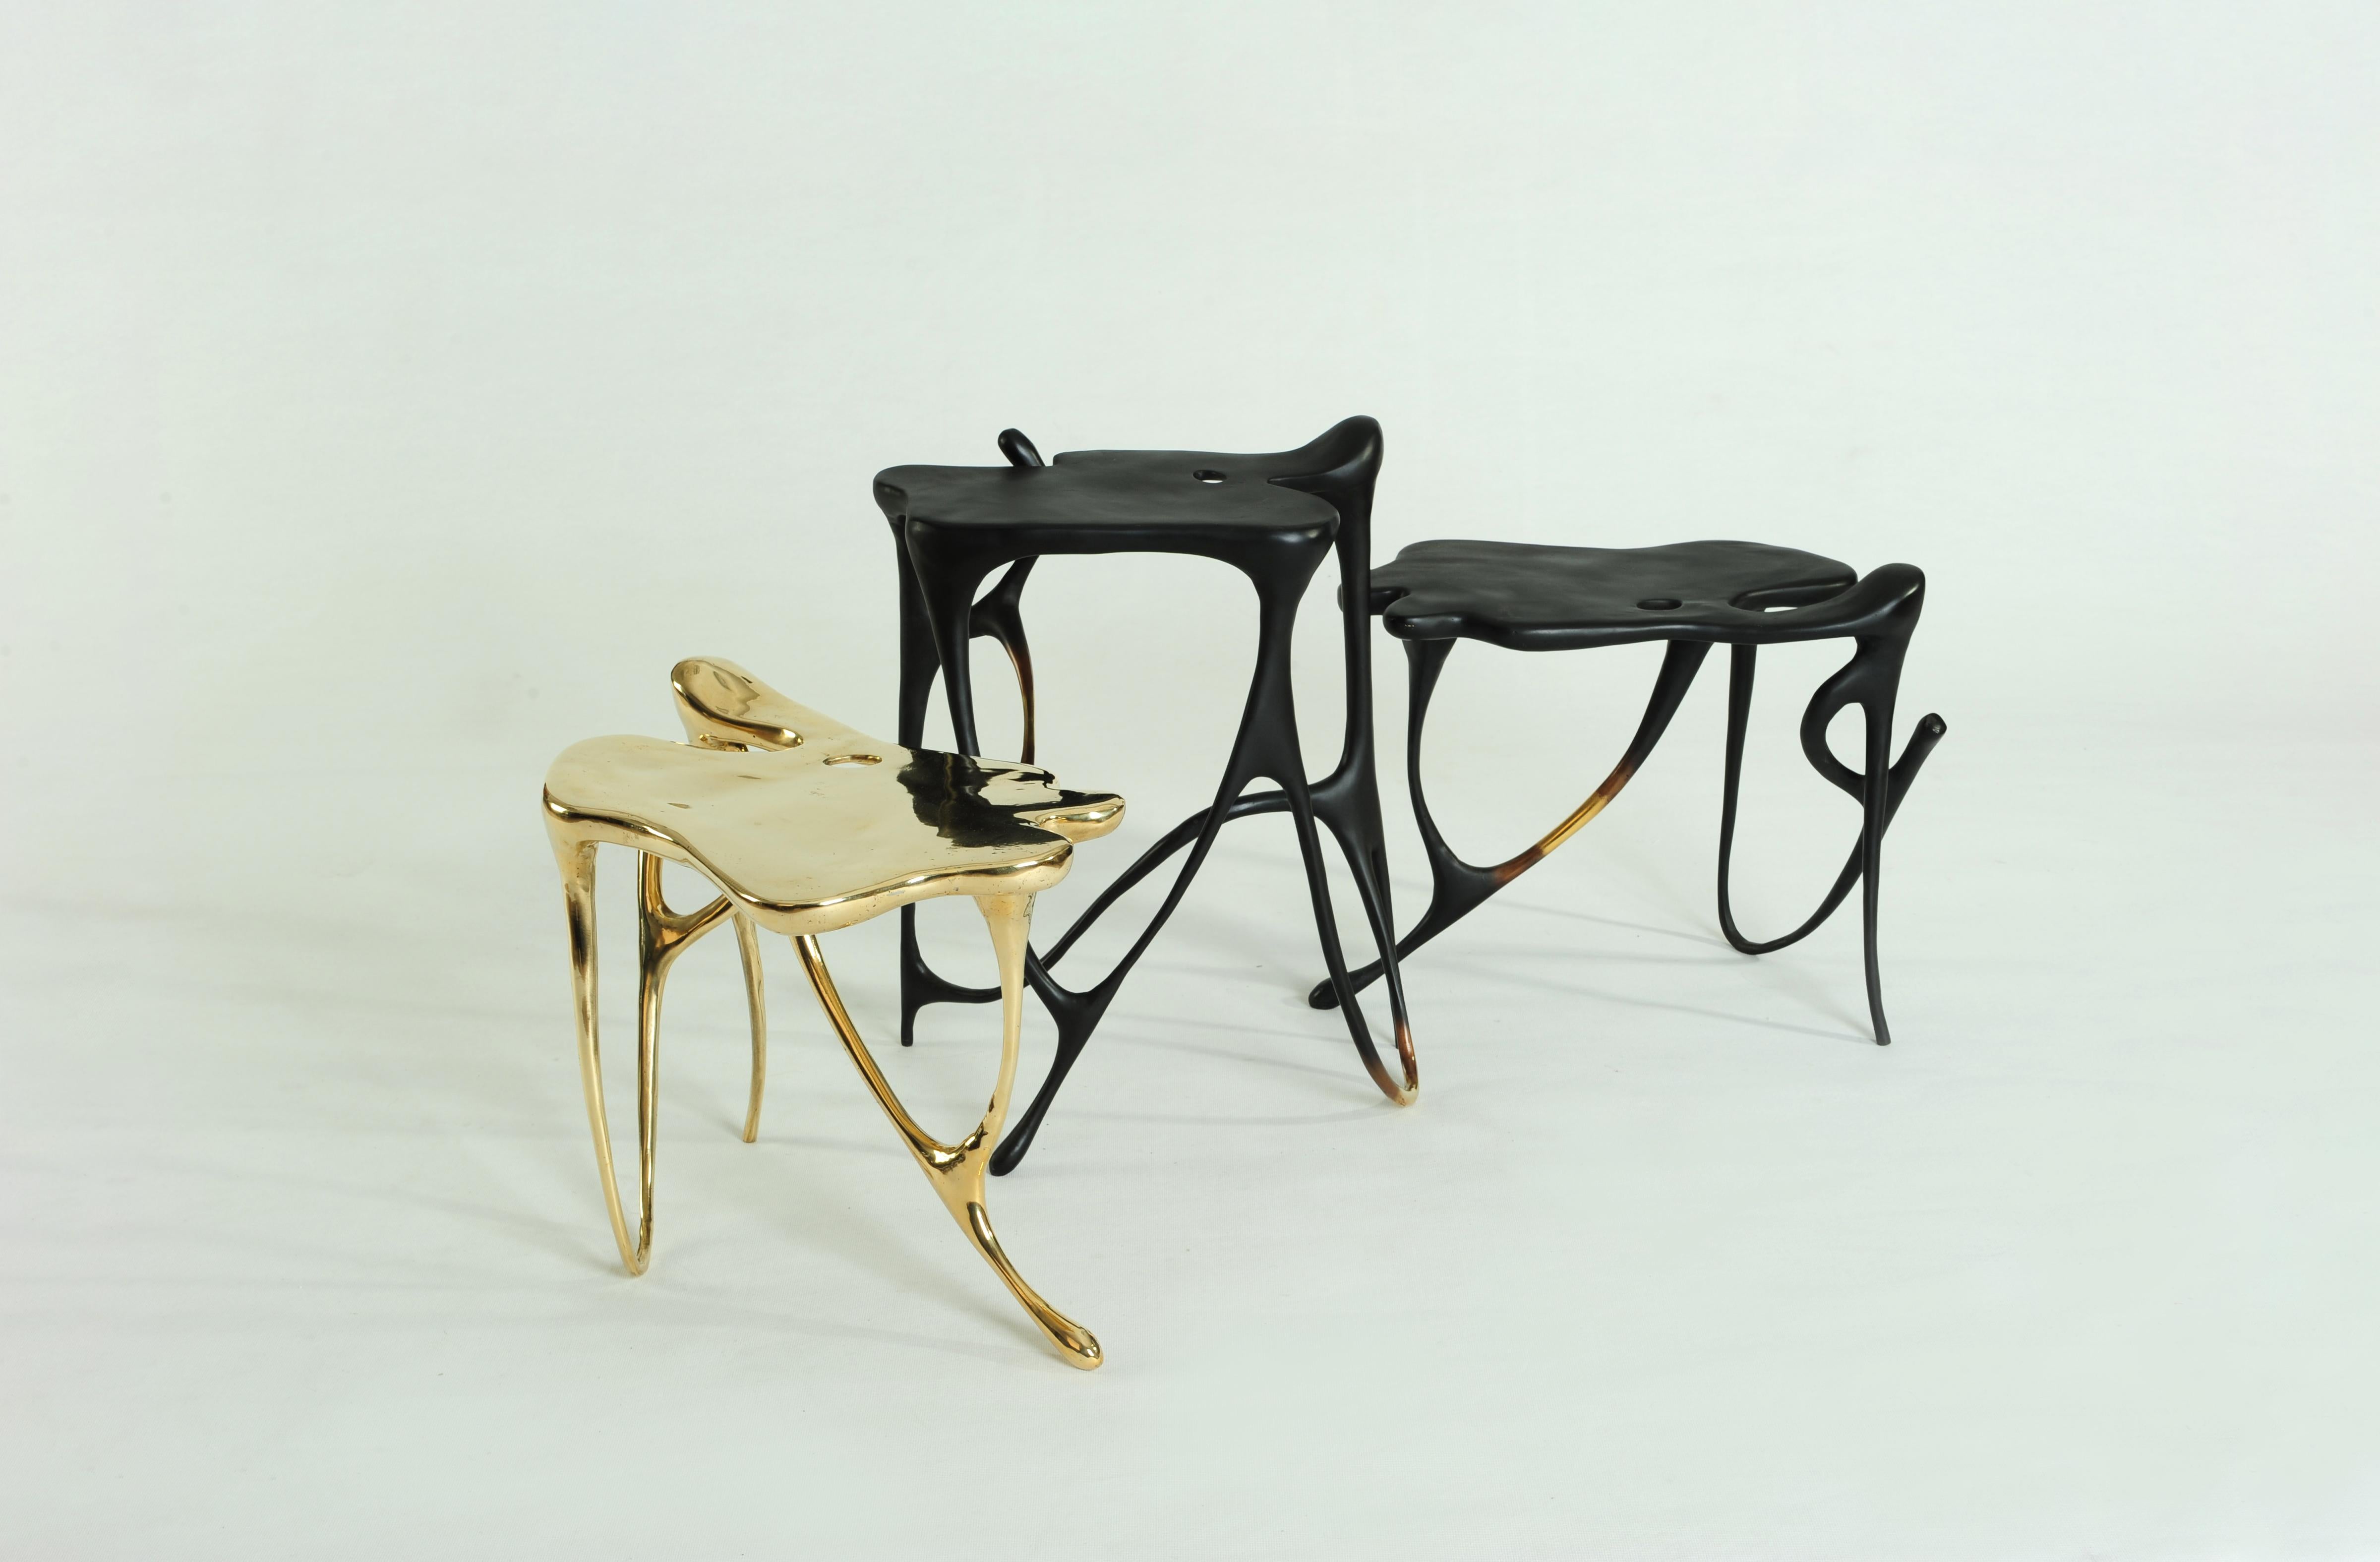 Calligraphic Sculpted Brass Side Table by Misaya 6